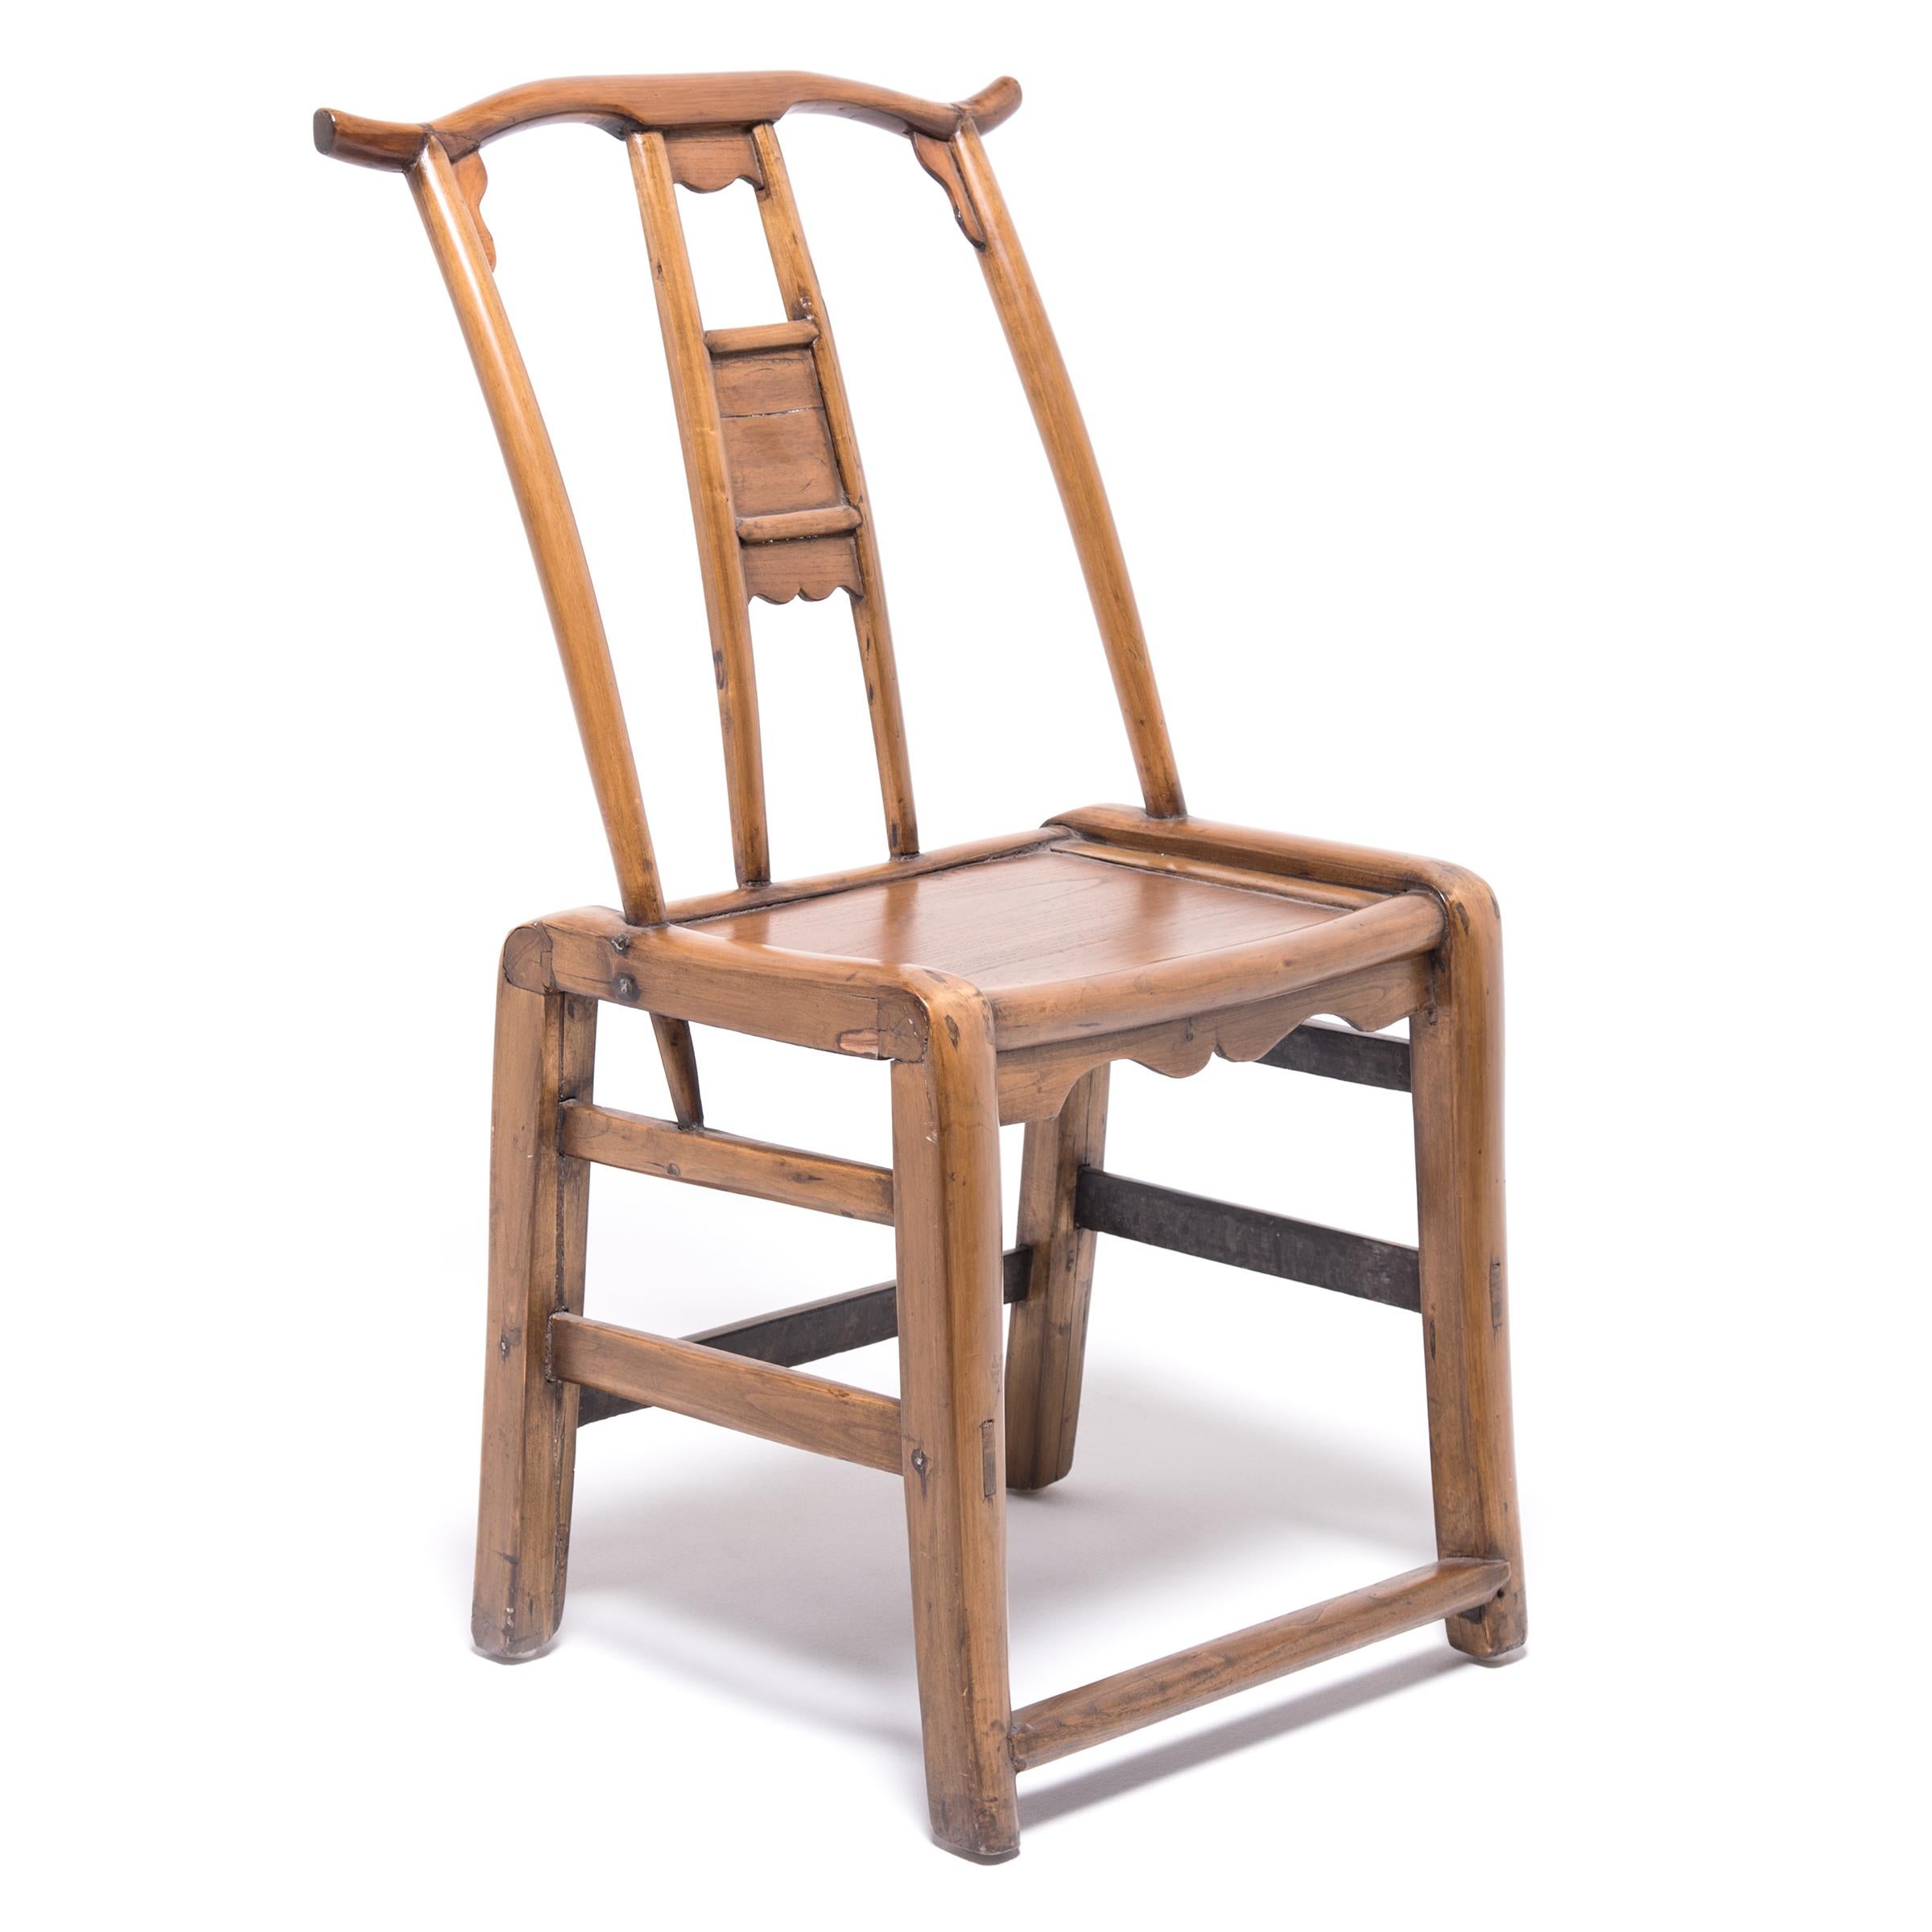 These 19th century cypress chairs with gently curved crest rails and undulating aprons were created by the age-old process of soaking, bending, and heating the wood to form it into the shape desired. The bent form legs wrap the top of the seat